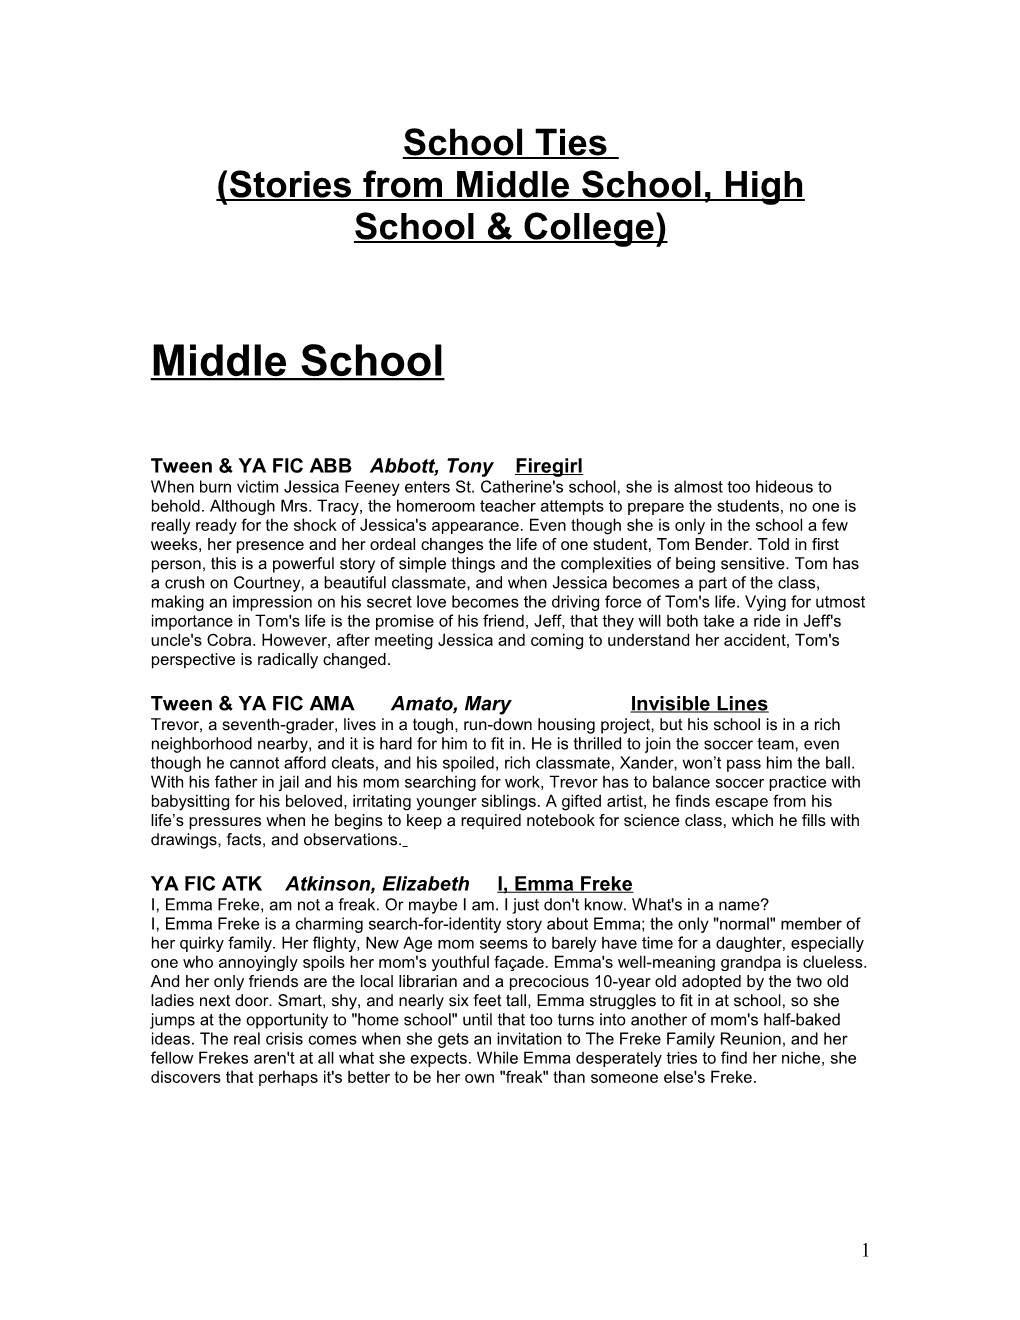 School Ties (Stories From Middle & High School & College)